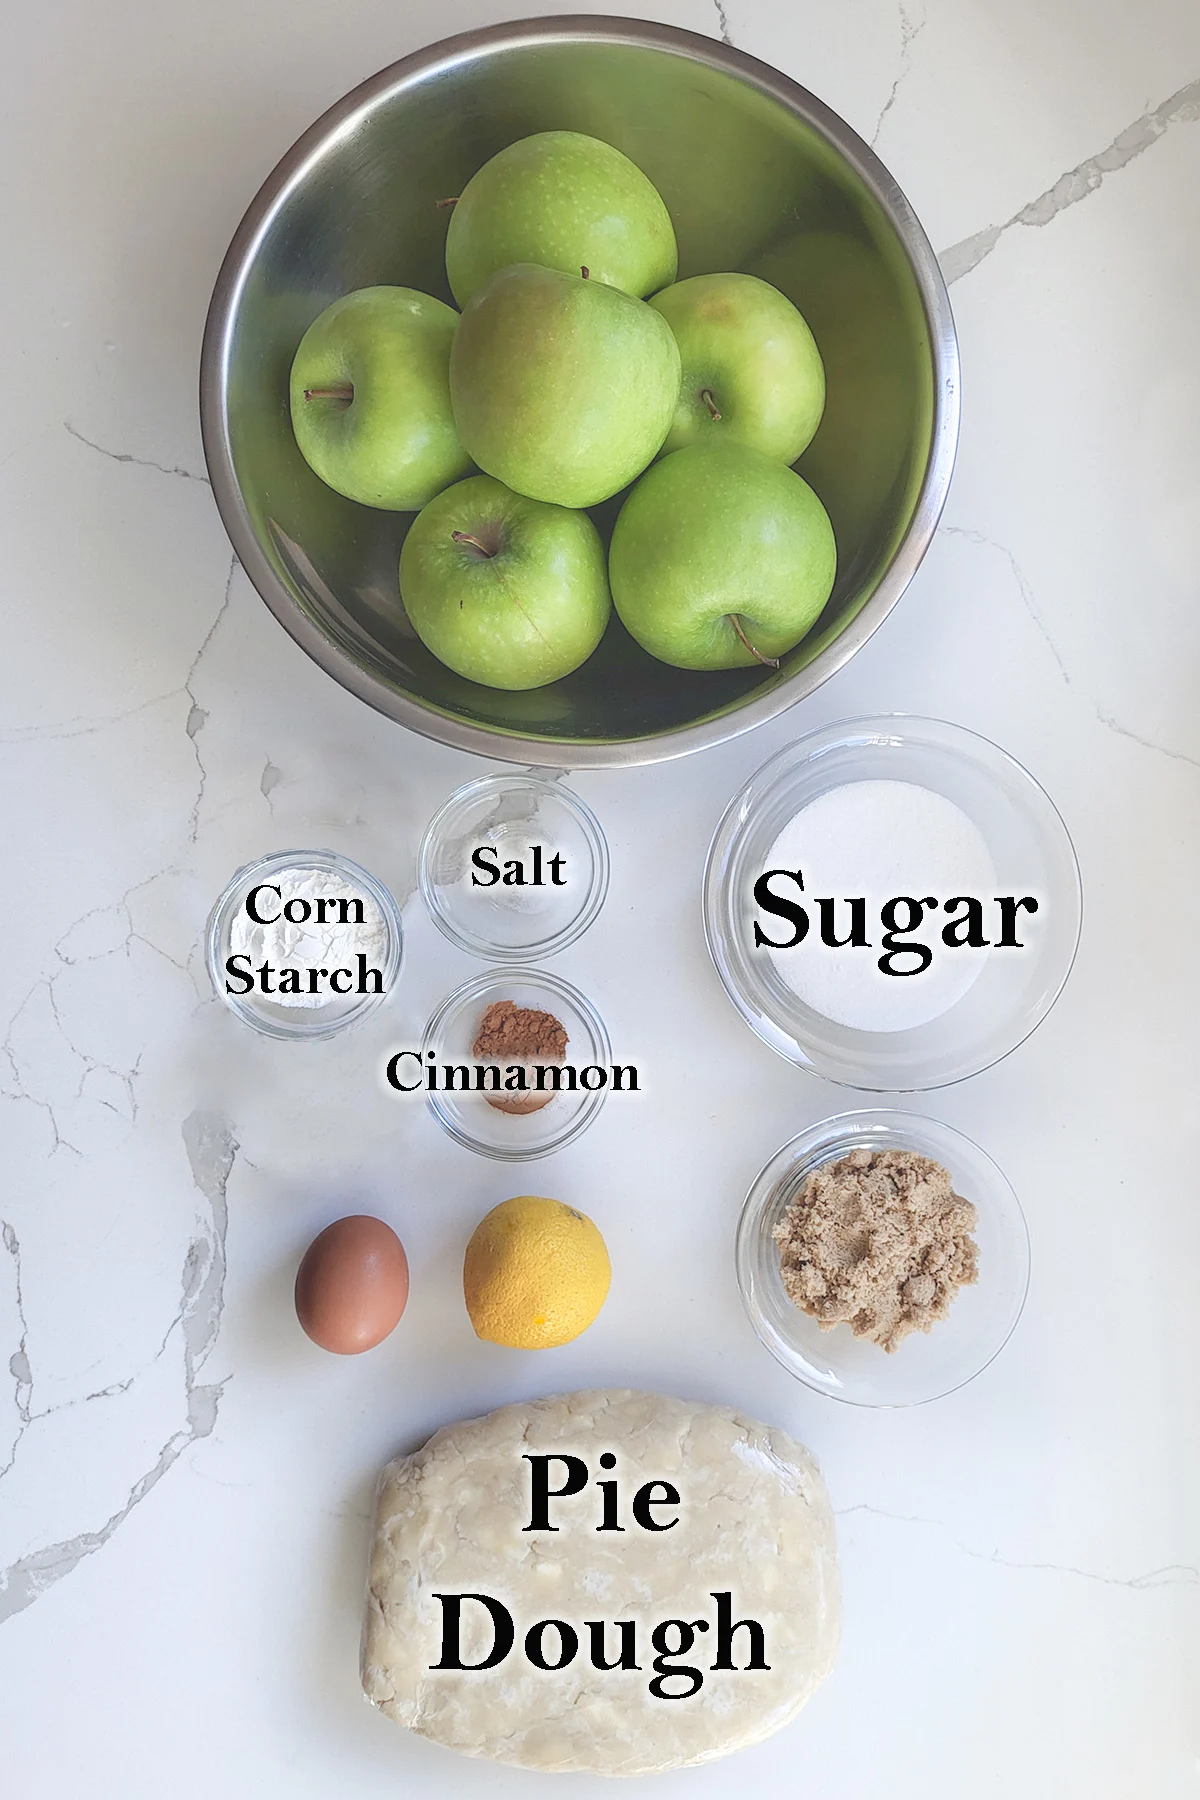 ingredients for apple pie in glass bowls on a white surface.